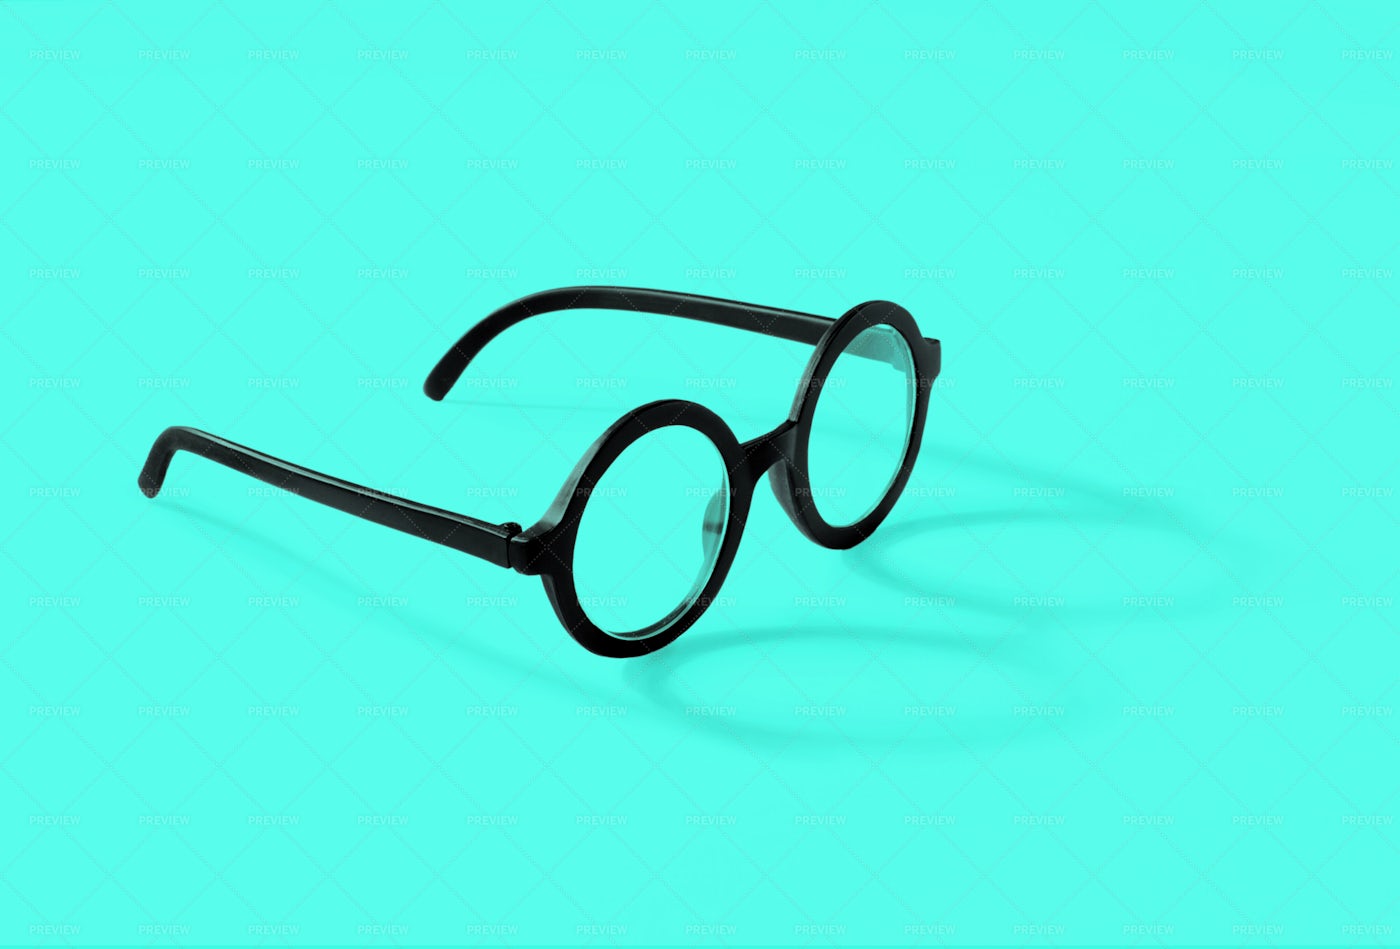 Round Glasses With Shadow: Stock Photos